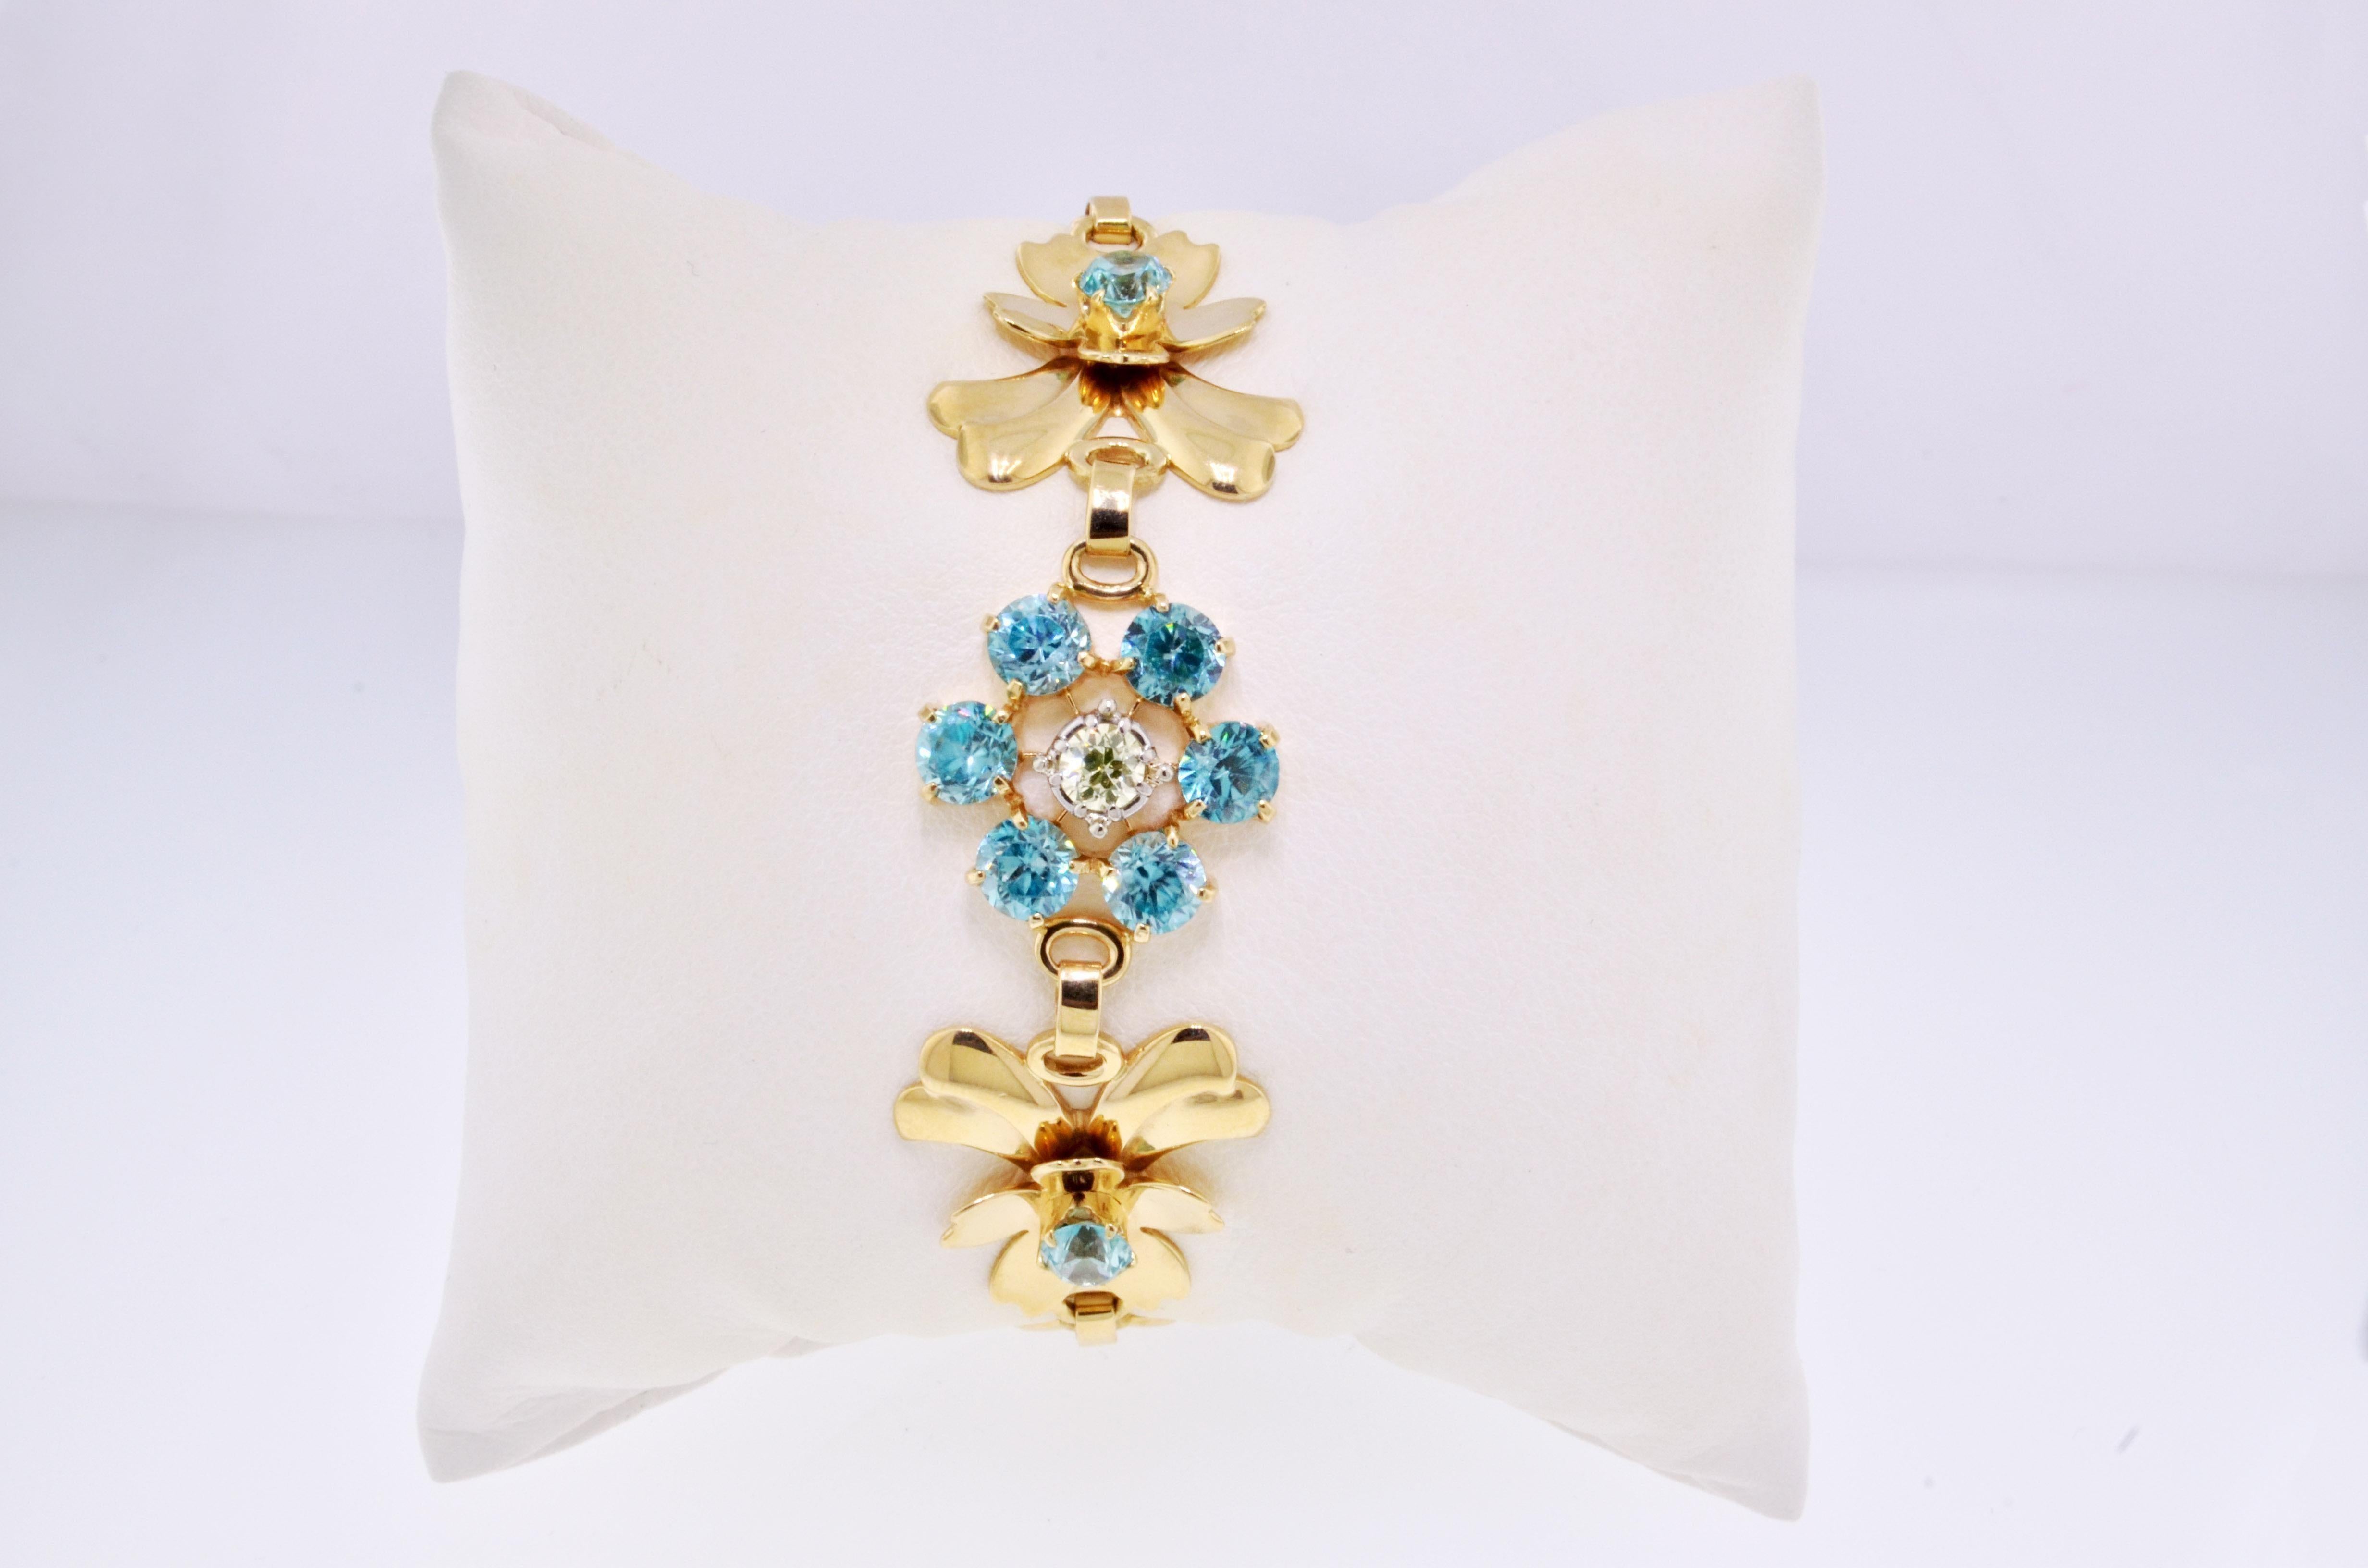 Breathtaking flower bracelet featuring bright blue topaz stones and a sparkling diamond accent. This absolutely gorgeous bracelet has a bold yet romantic design with its lifelike flowers and vibrant colorful gemstones. This botanical beauty makes a